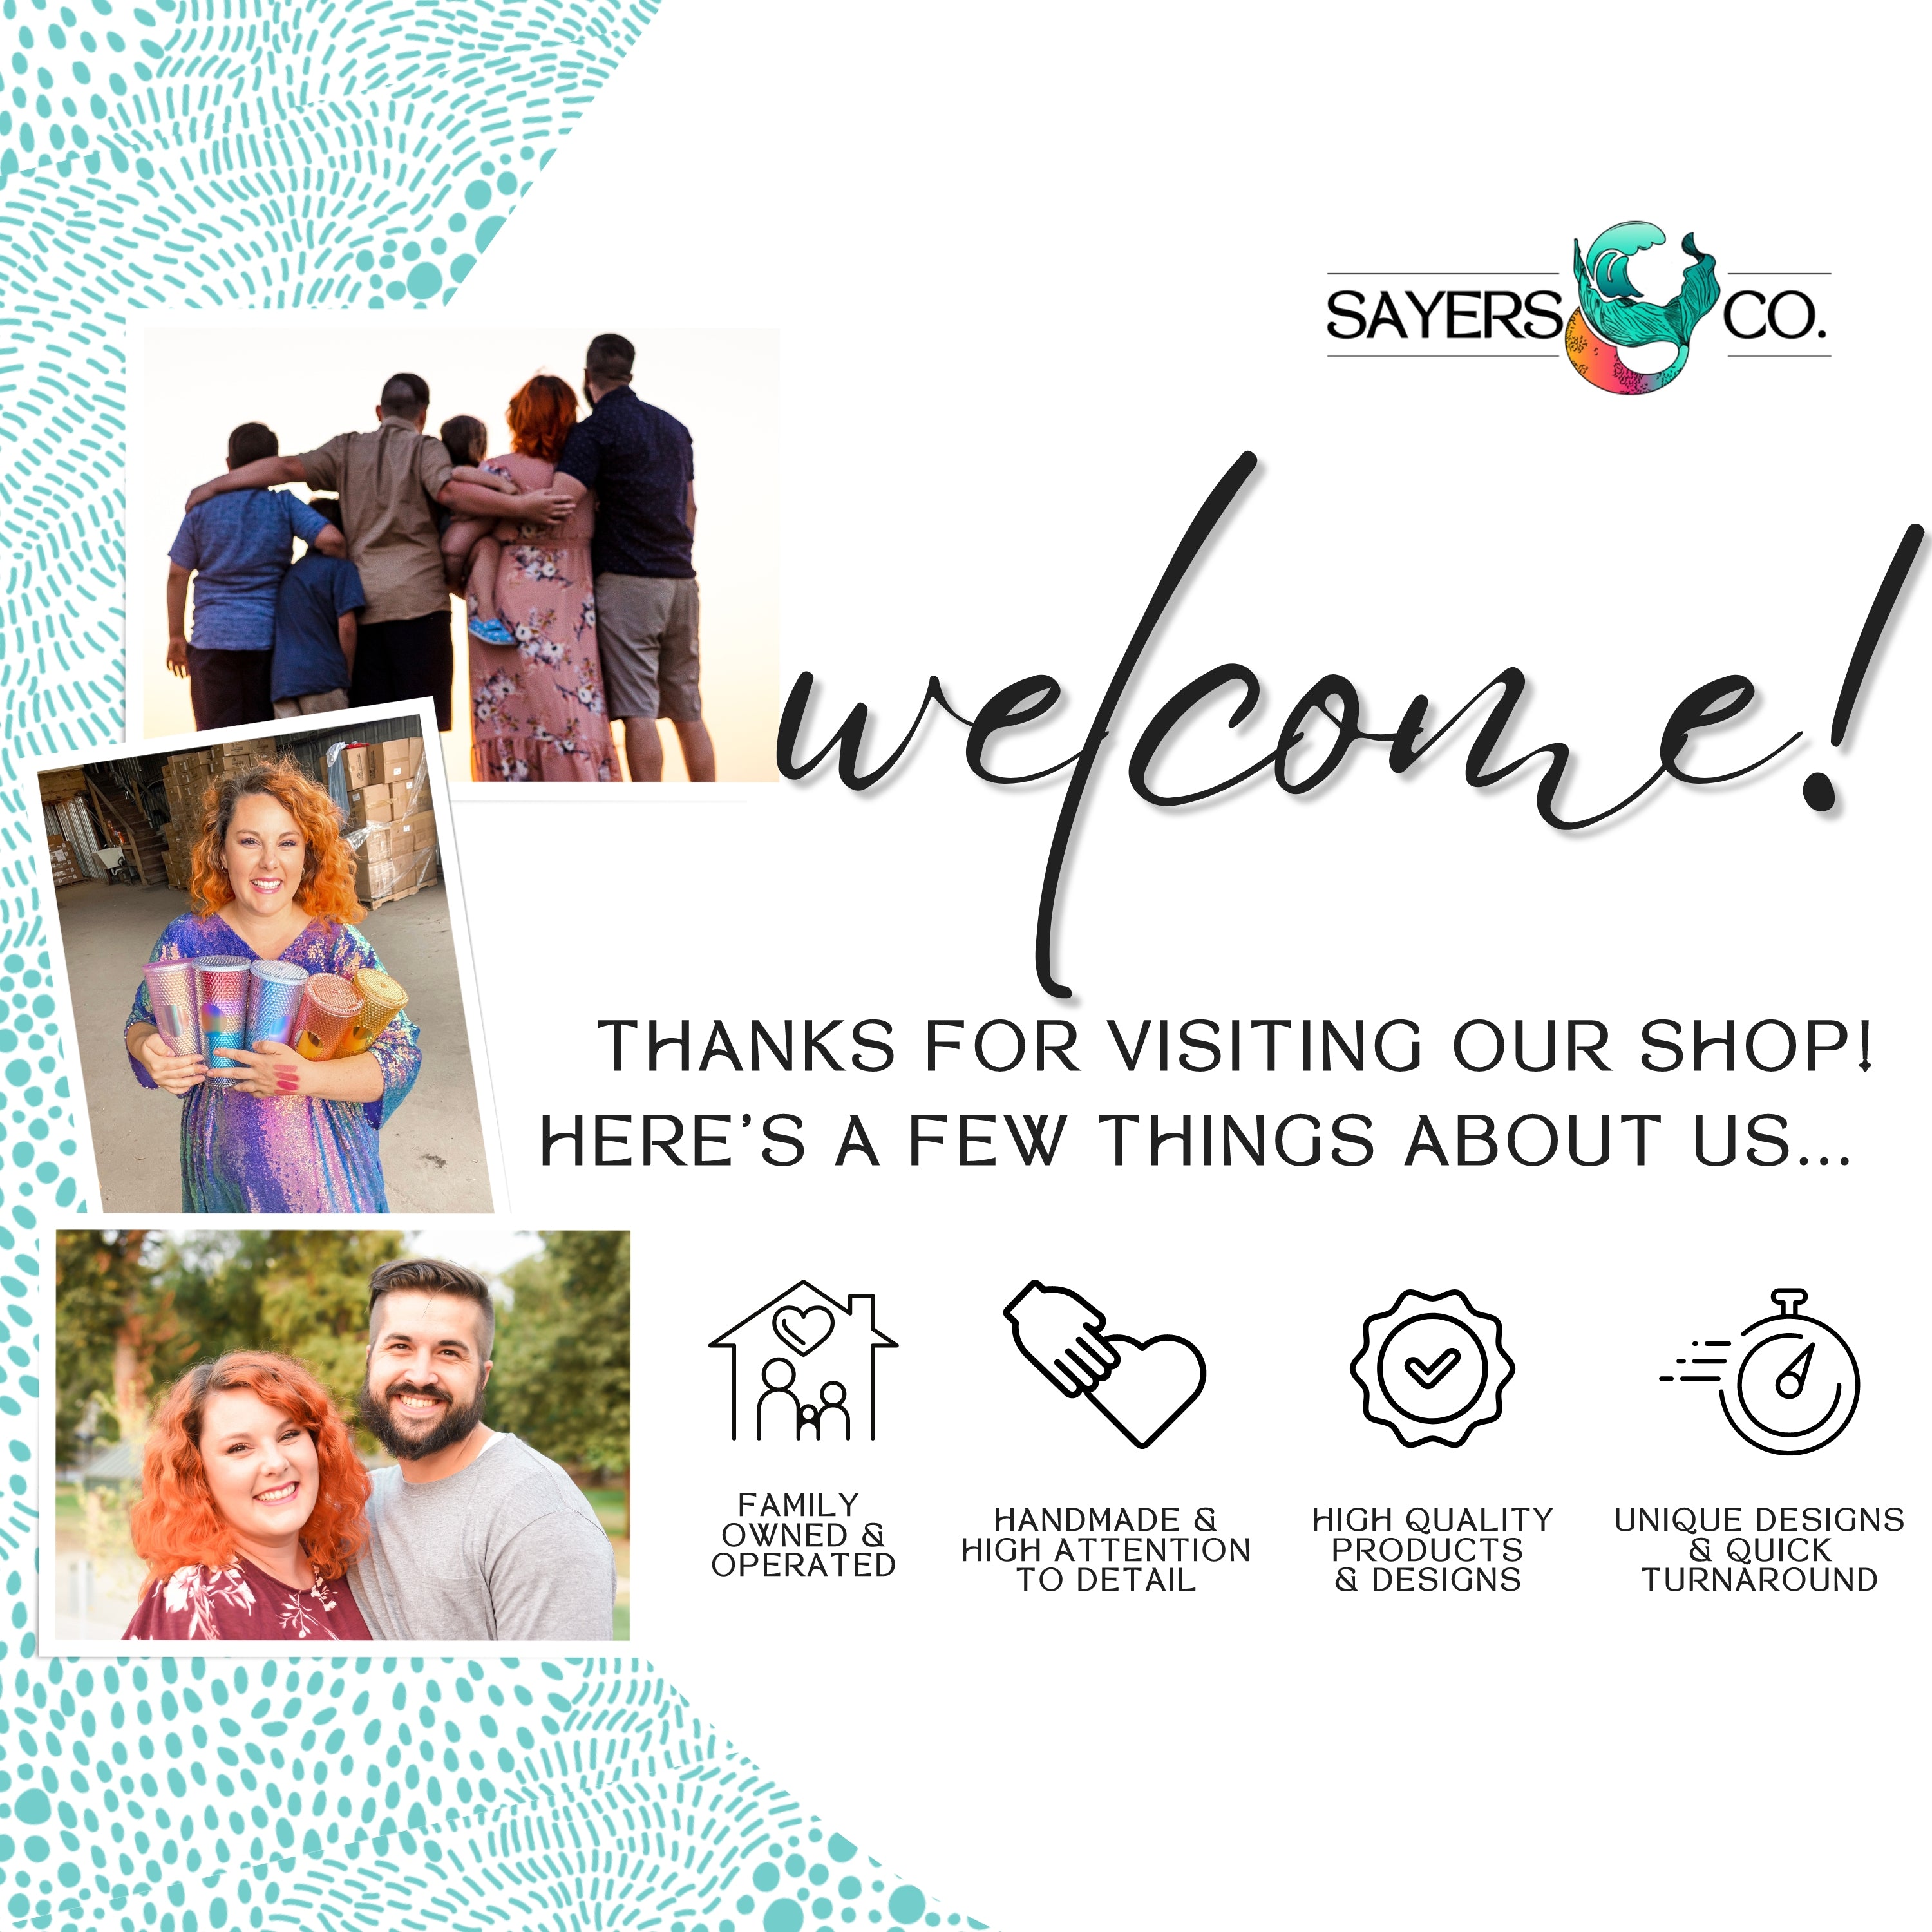 Welcome-Sayers&Co-Family-Owned-Handmade-Unique | Sayers & Co.